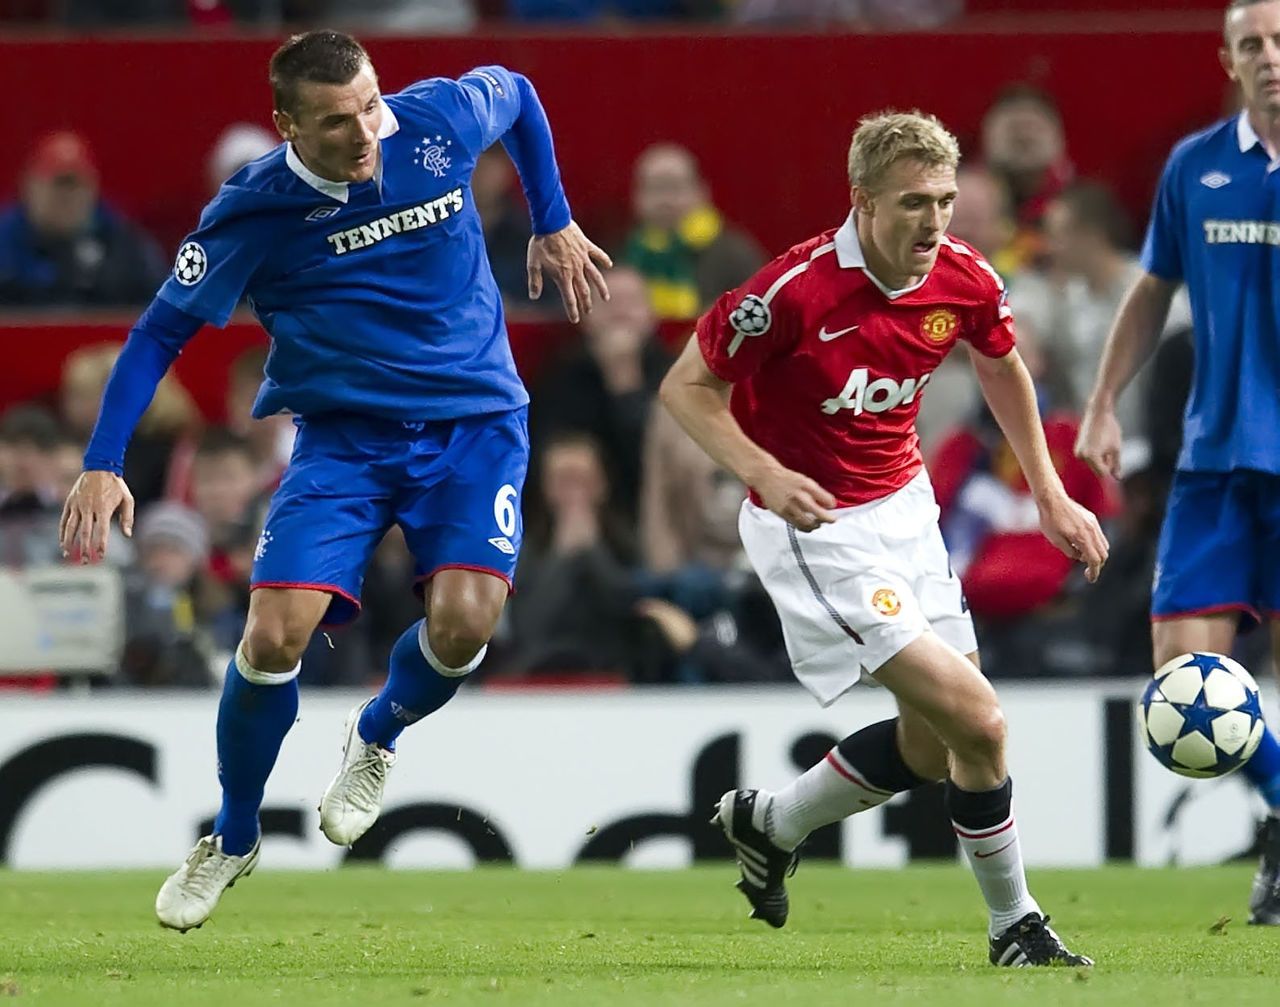 Scotland teammates Lee McCulloch and Darren Fletcher battle during the Old Trafford stalemate.